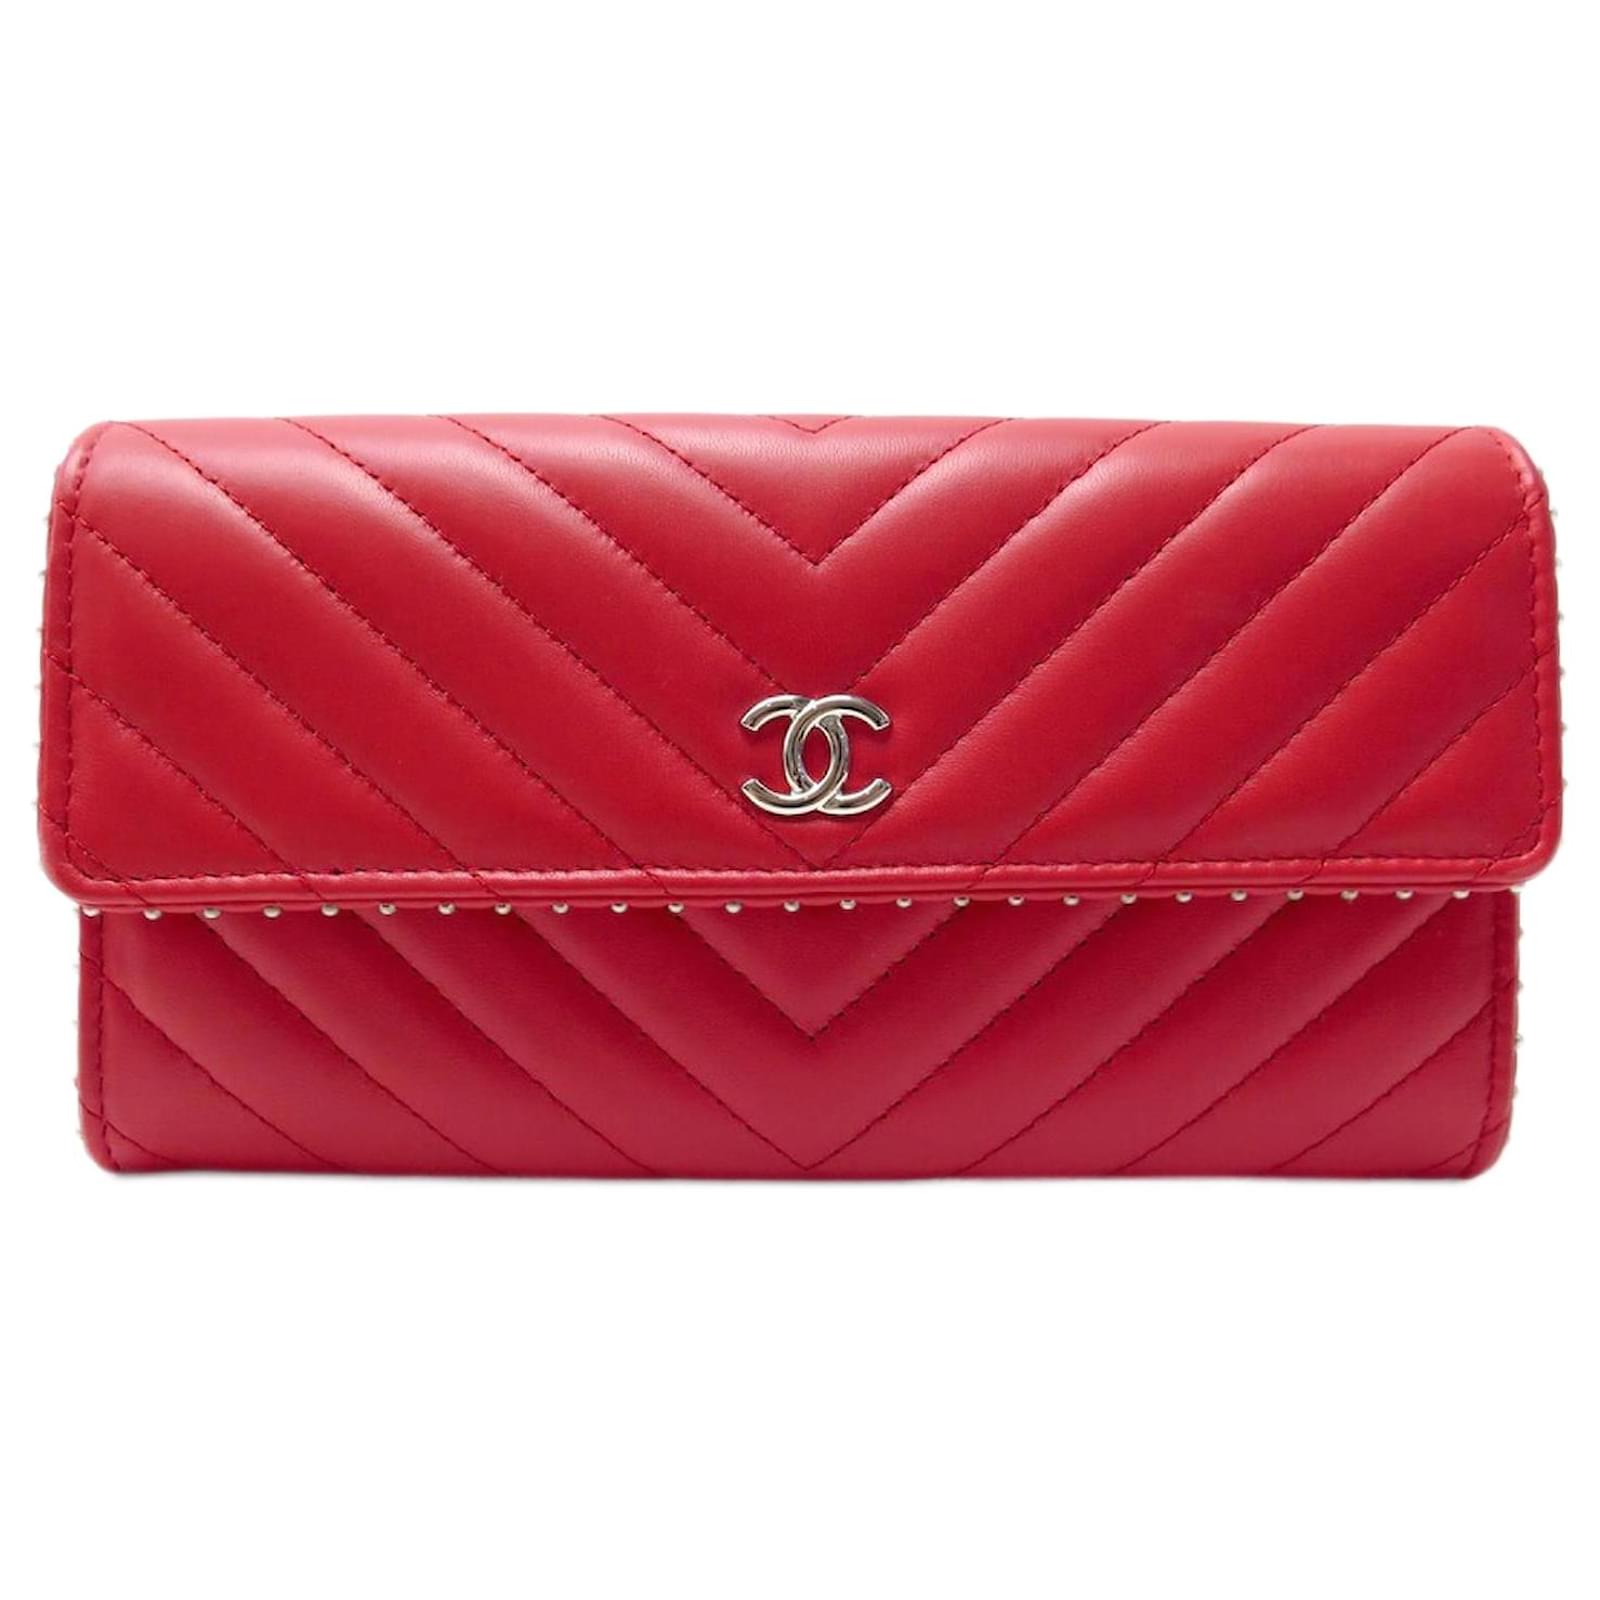 NEW CHANEL LOGO CC WALLET IN RED CHEVRON STUDDED LEATHER NEW